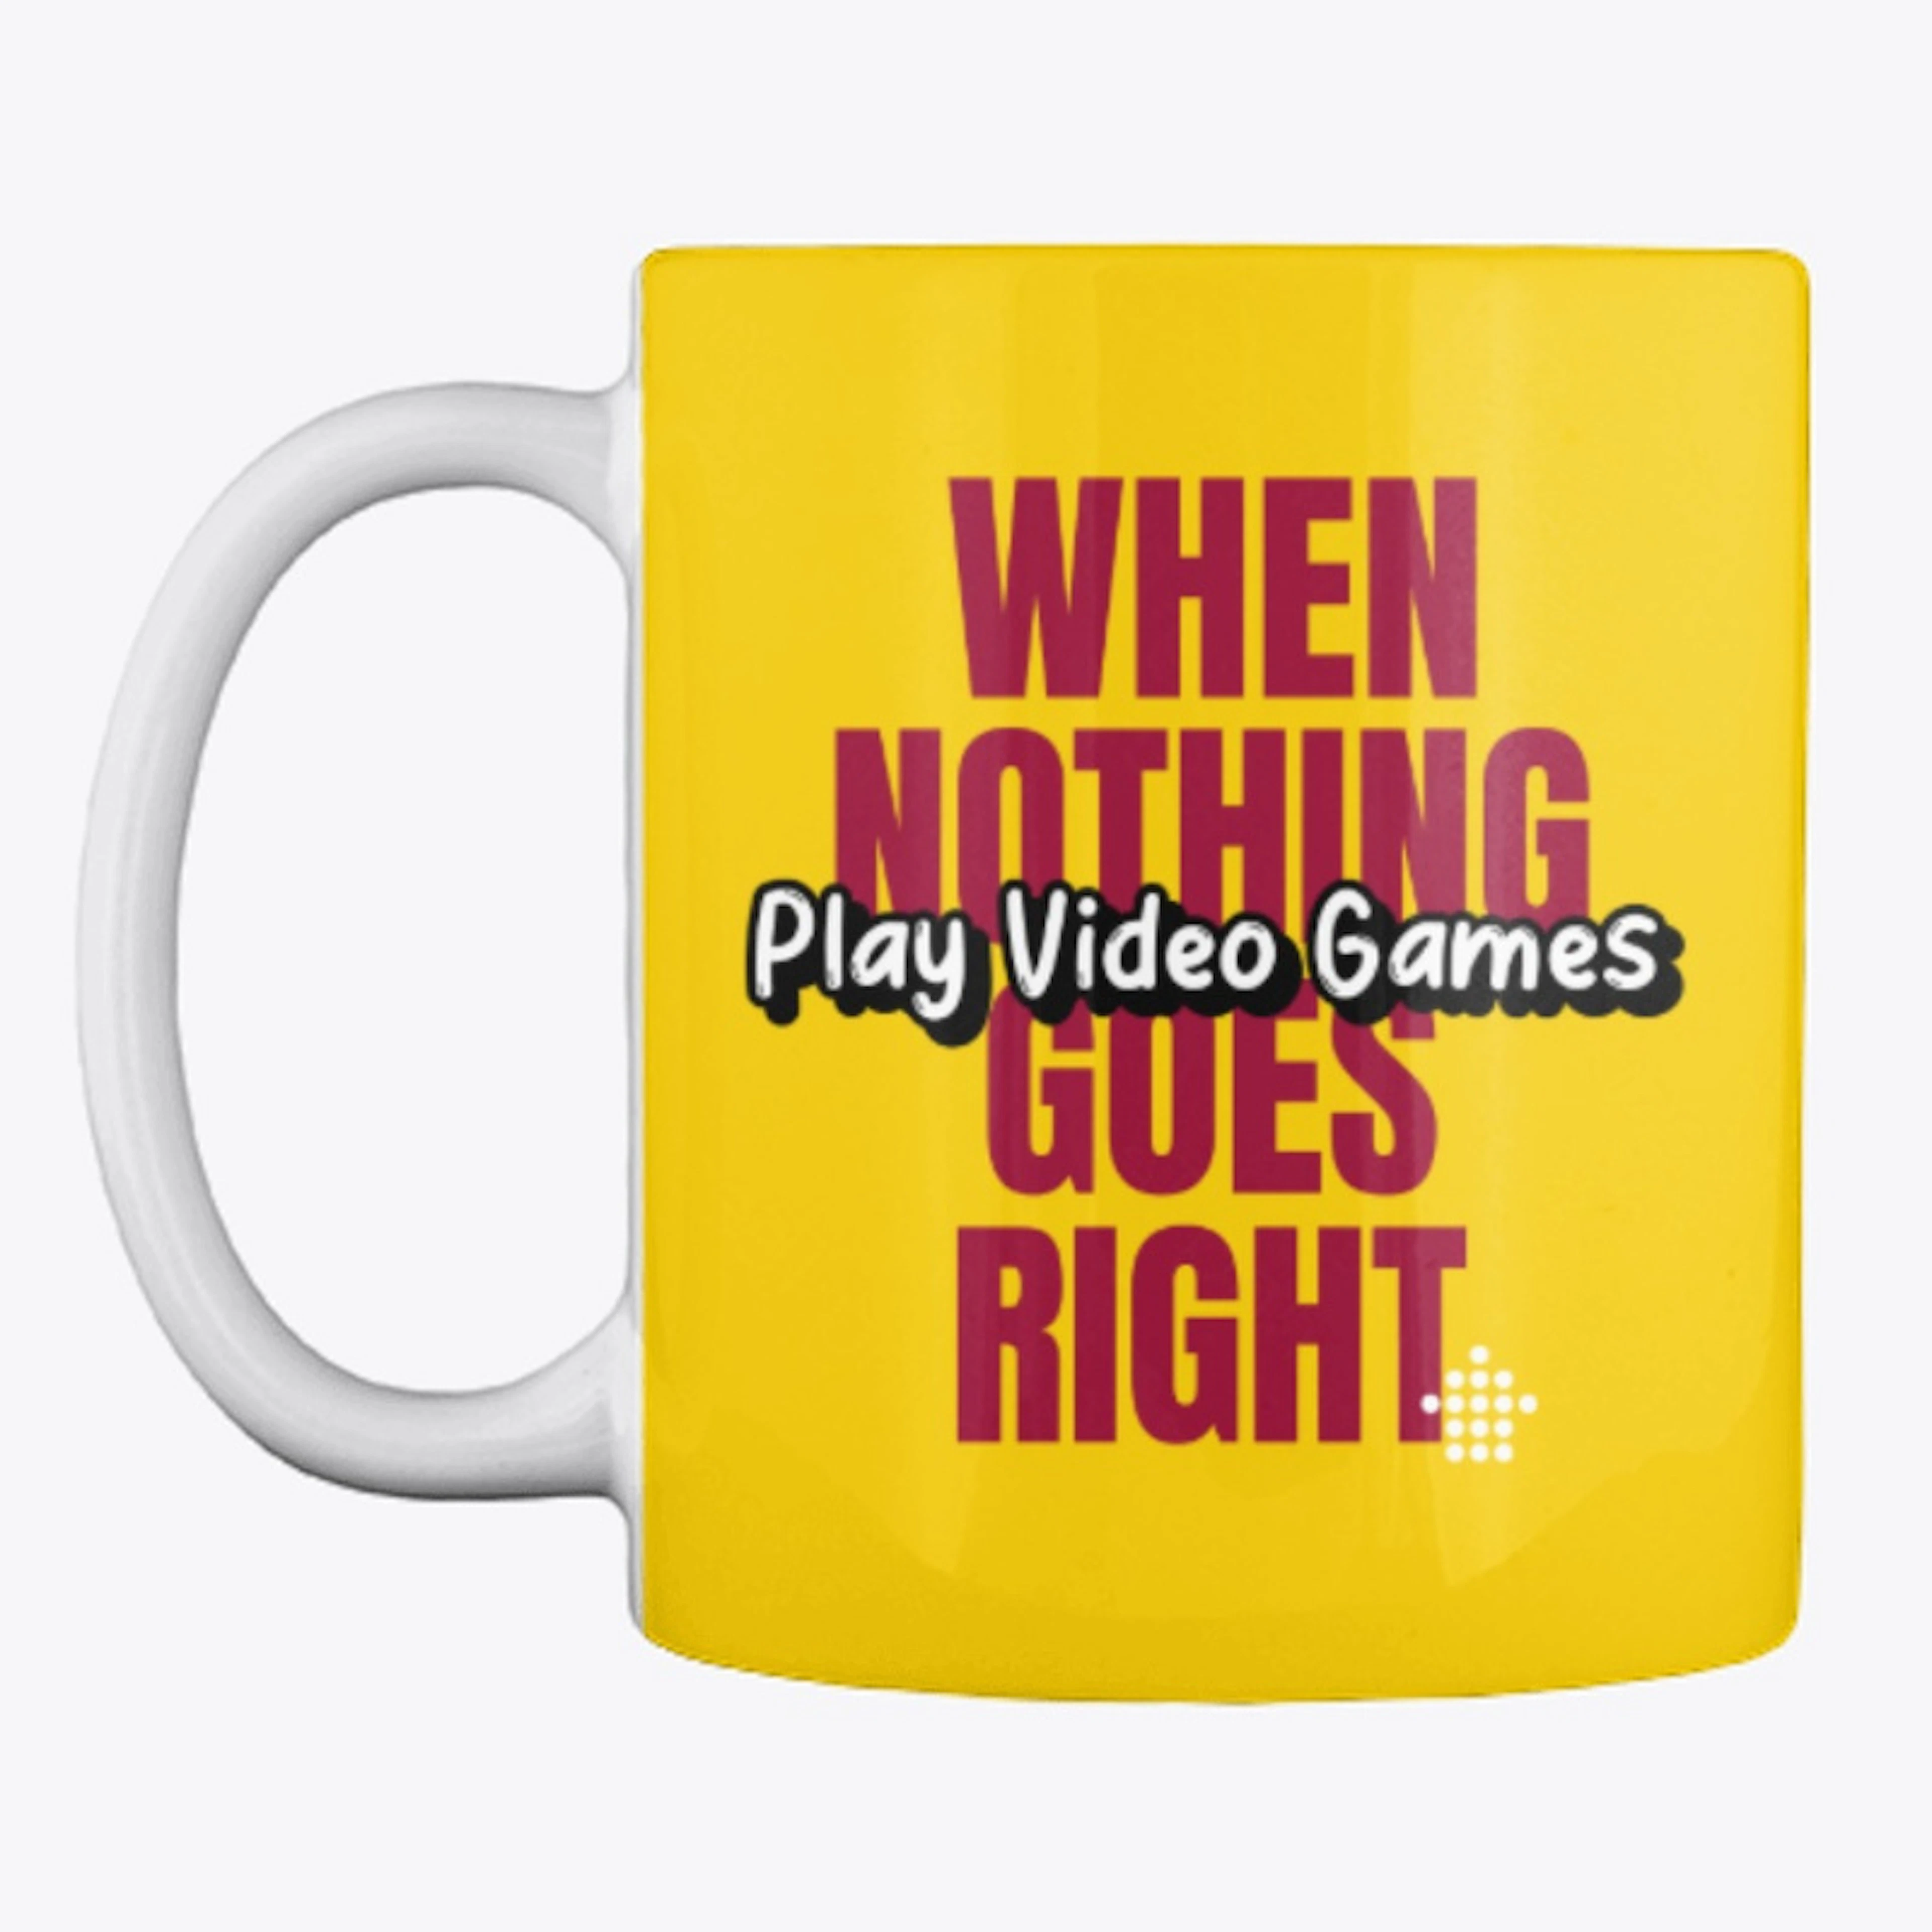 Nothing Goes Right- Play Video Games